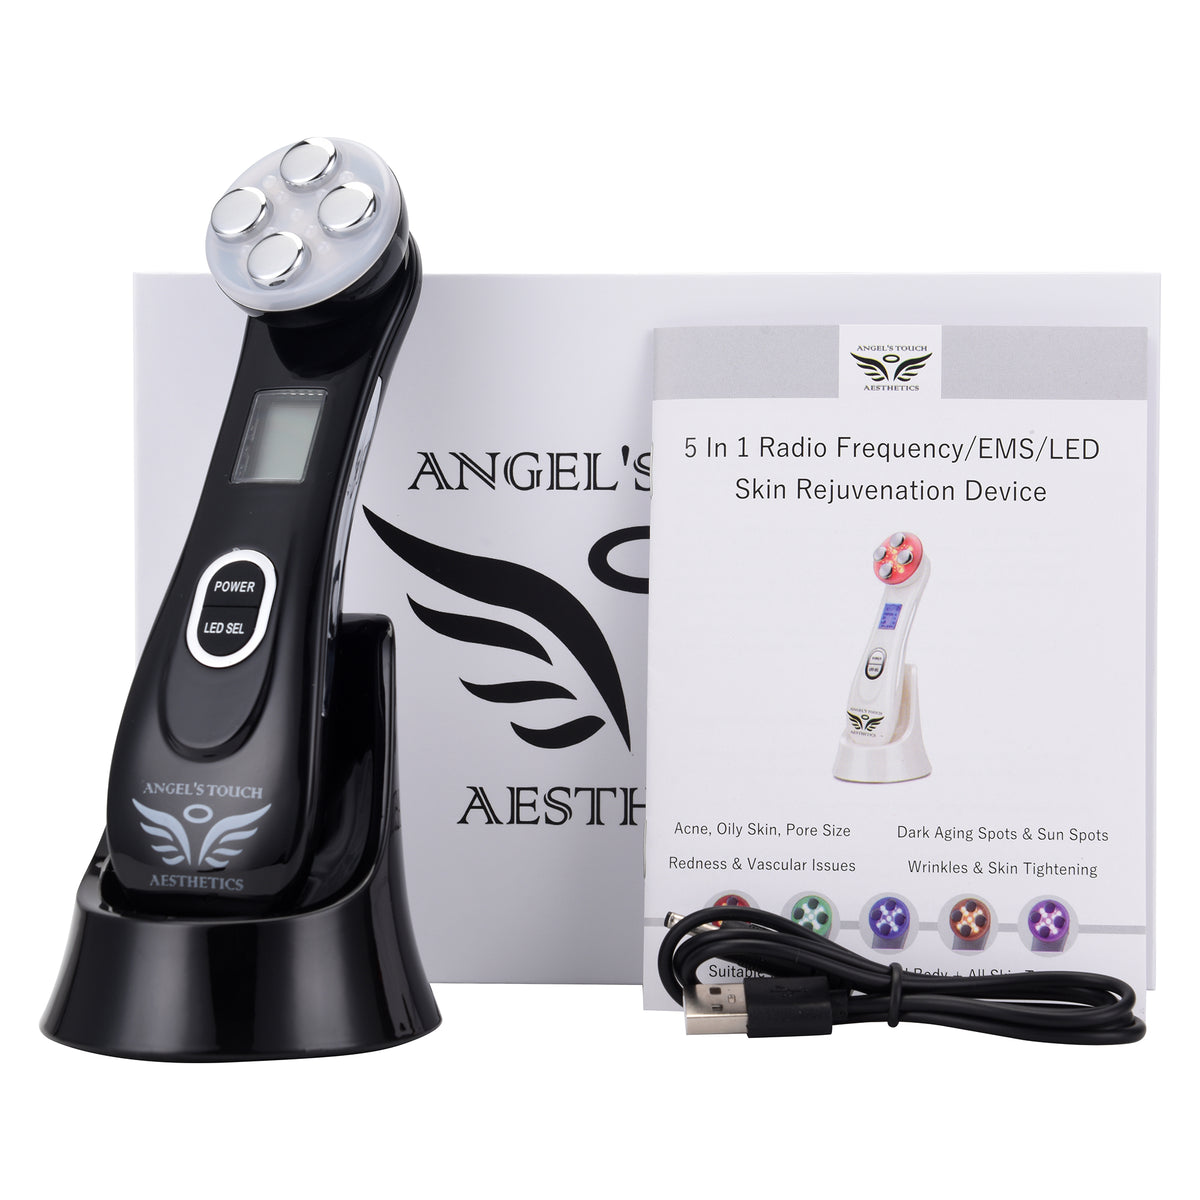 5 In 1 Radio Frequency/EMS/LED Skin Rejuvenation Device – Angels 